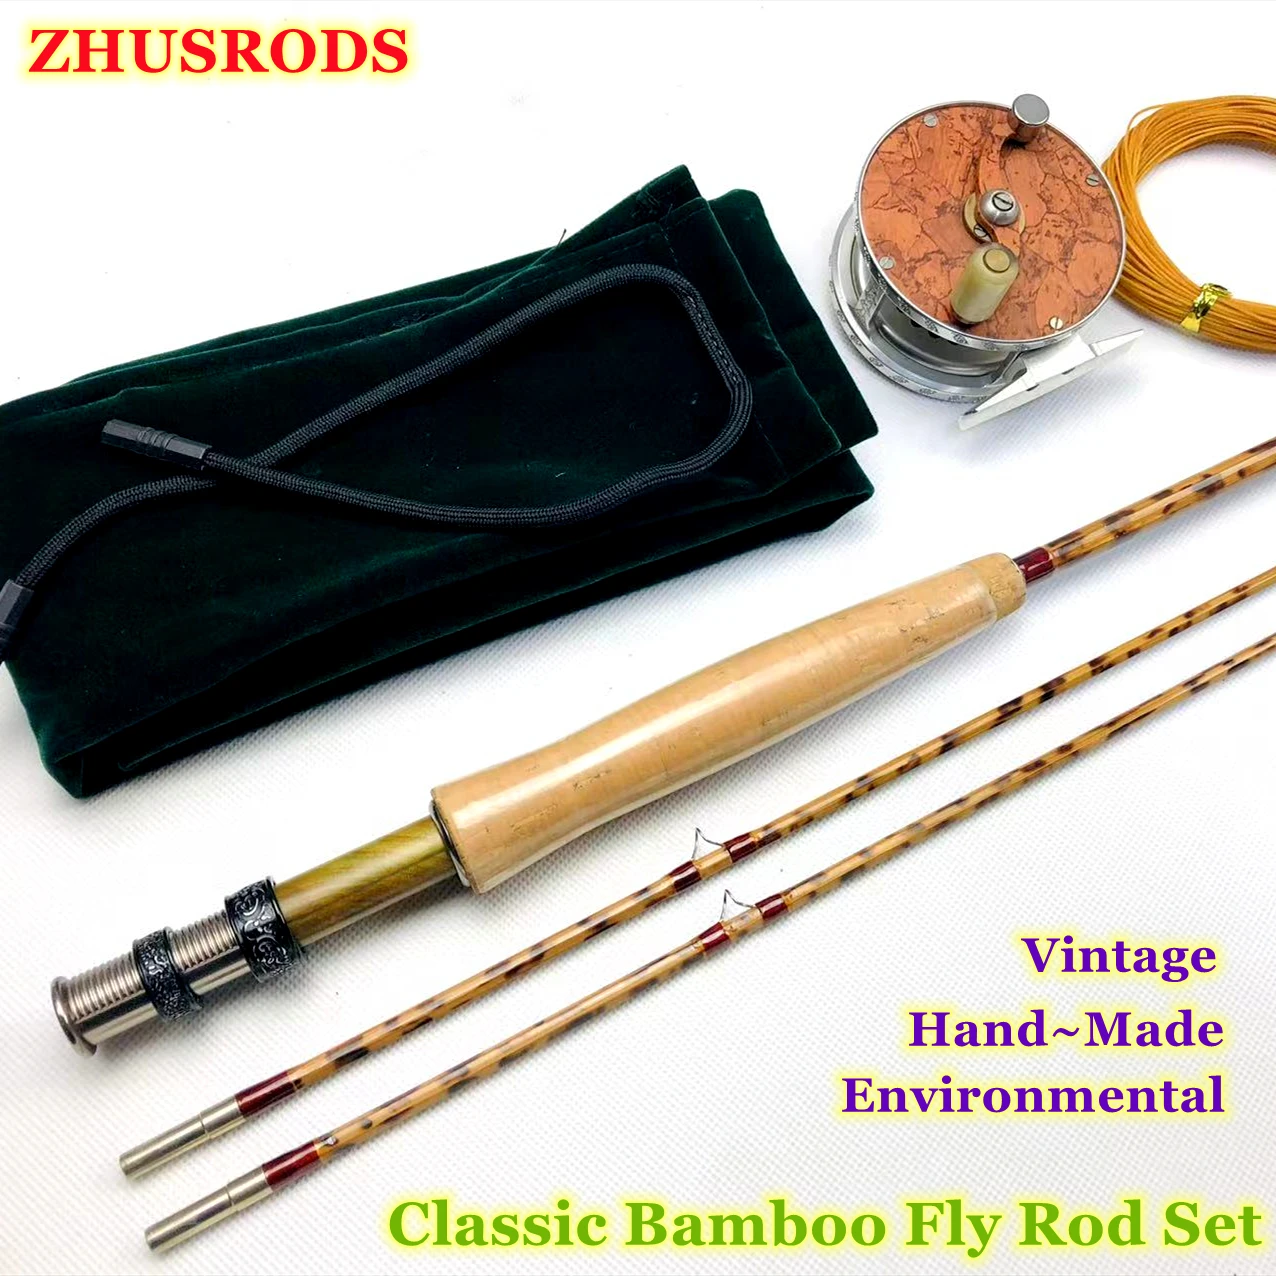 

ZHUSRODS Bamboo Fly Rod Set / Flame Rod 7'0"~4 wt/Fly Reel 3"/Fly Line #4/Bag